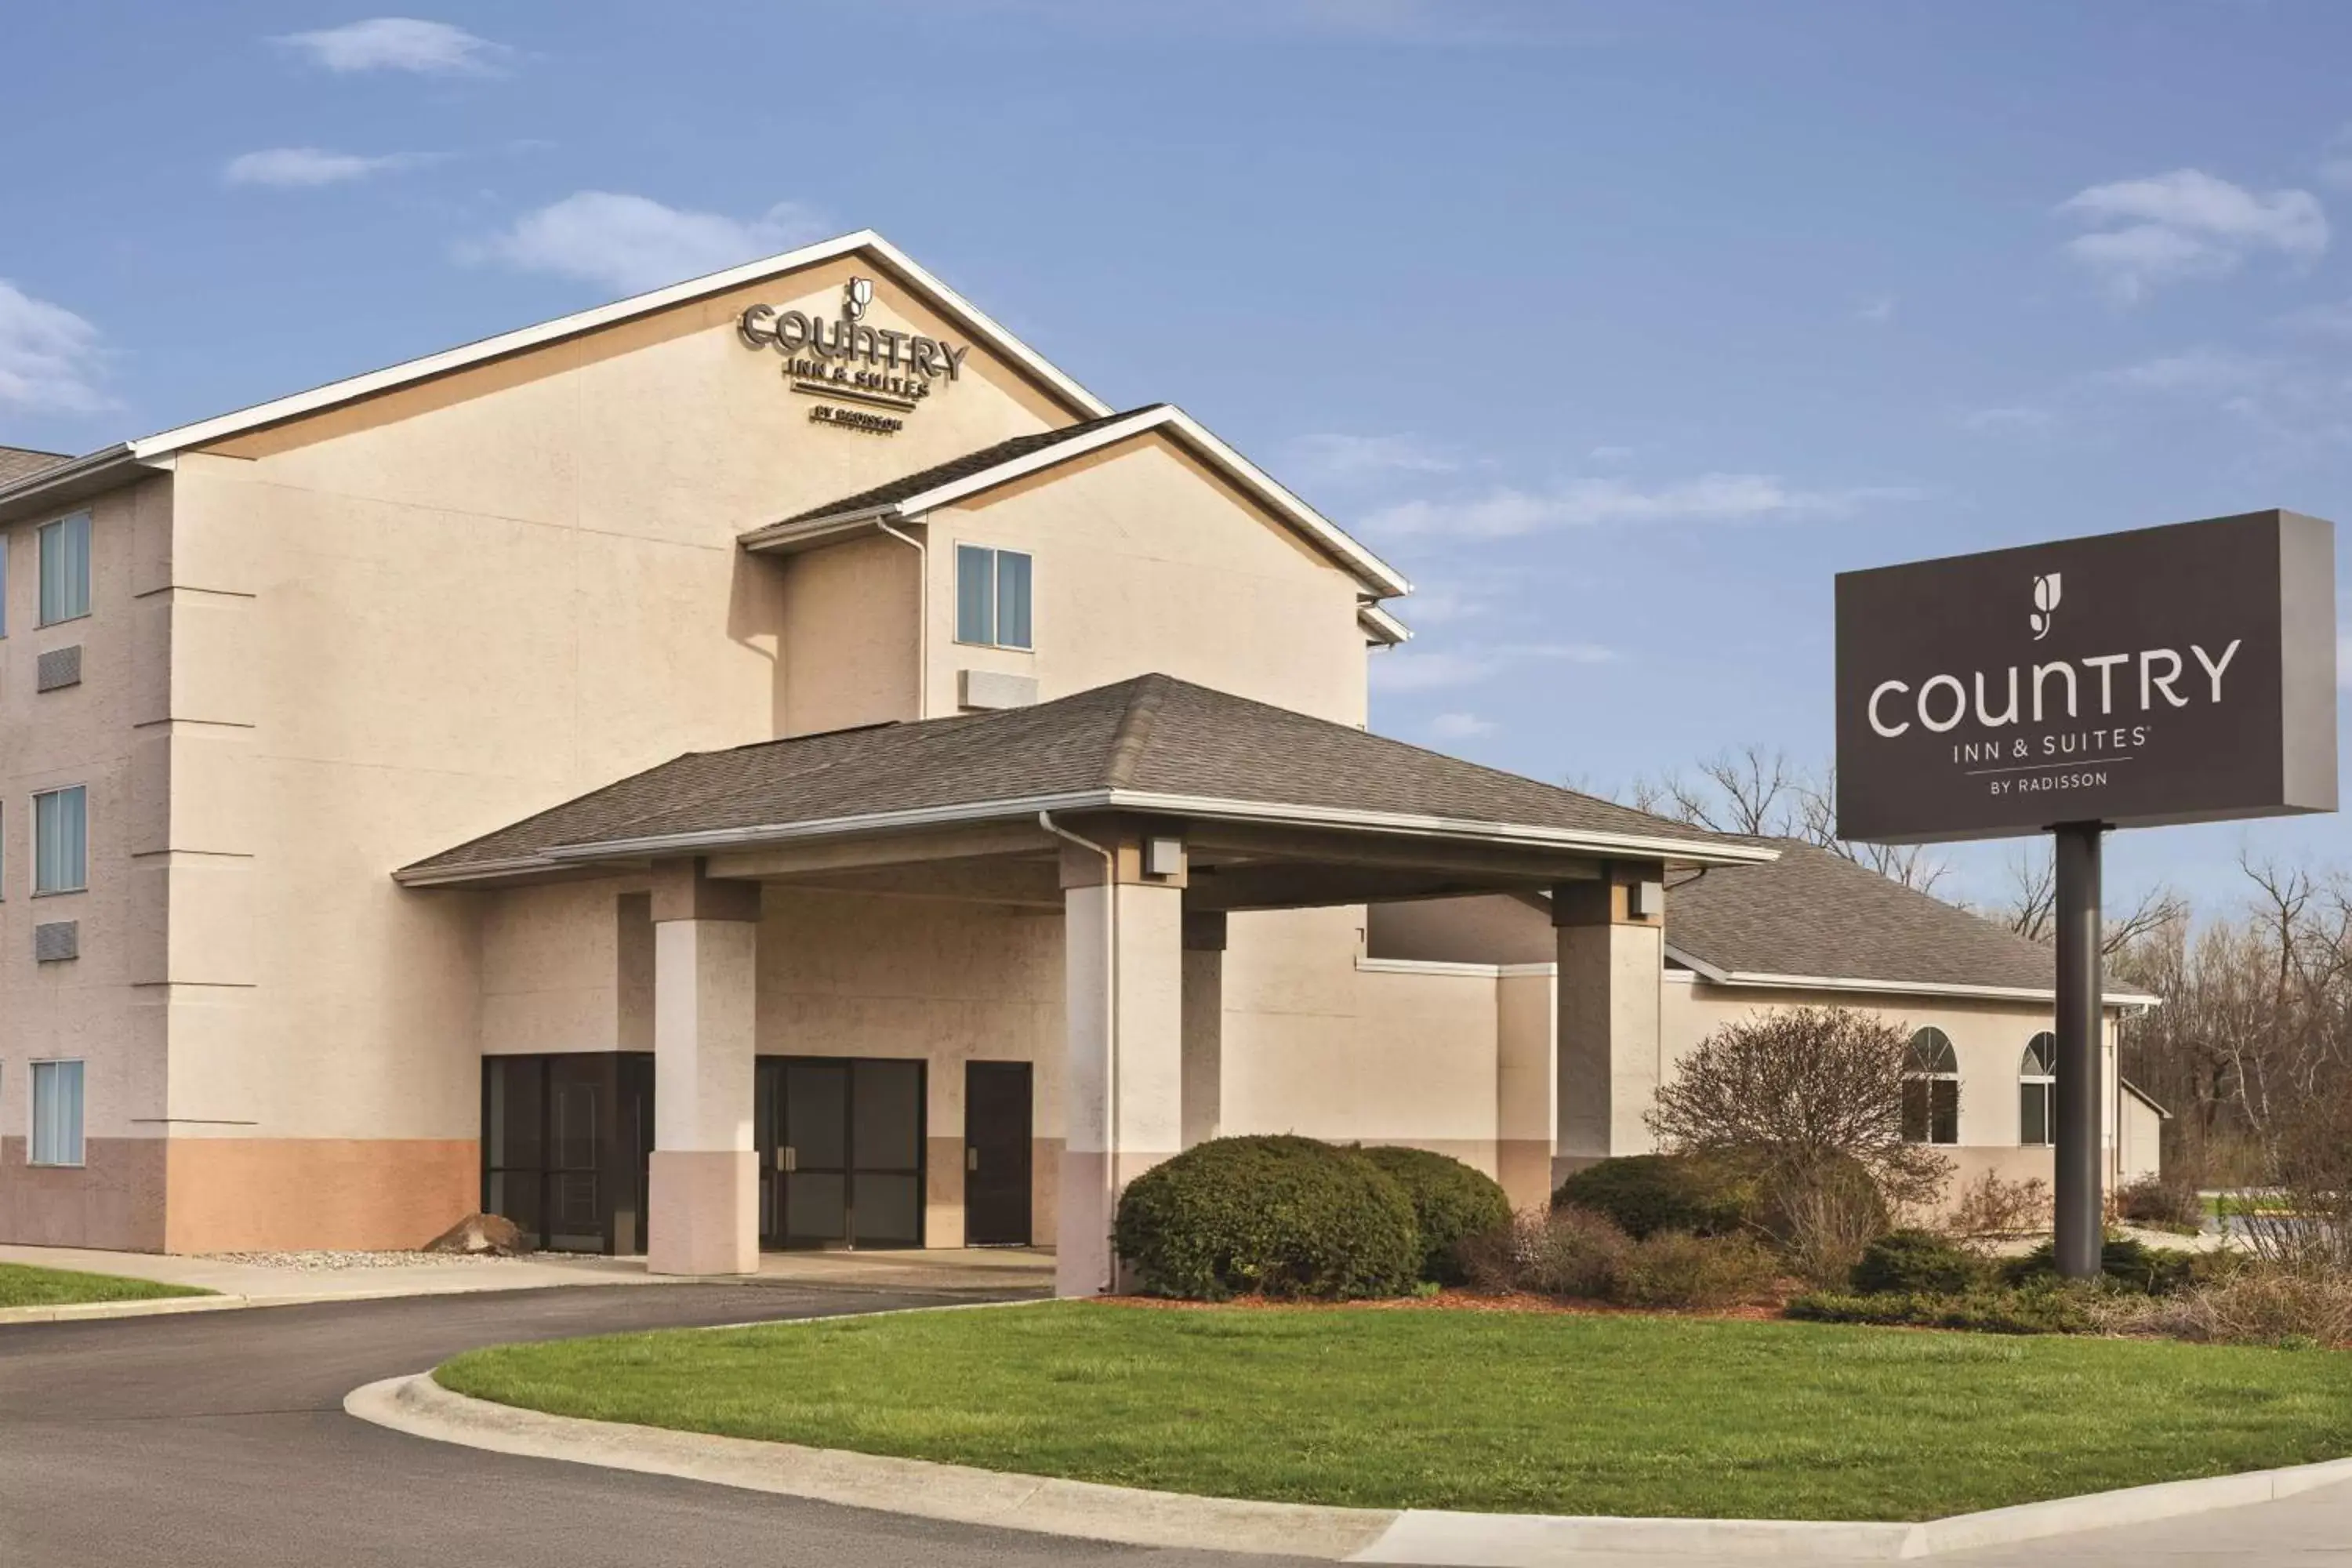 Property Building in Country Inn & Suites by Radisson, Auburn, IN